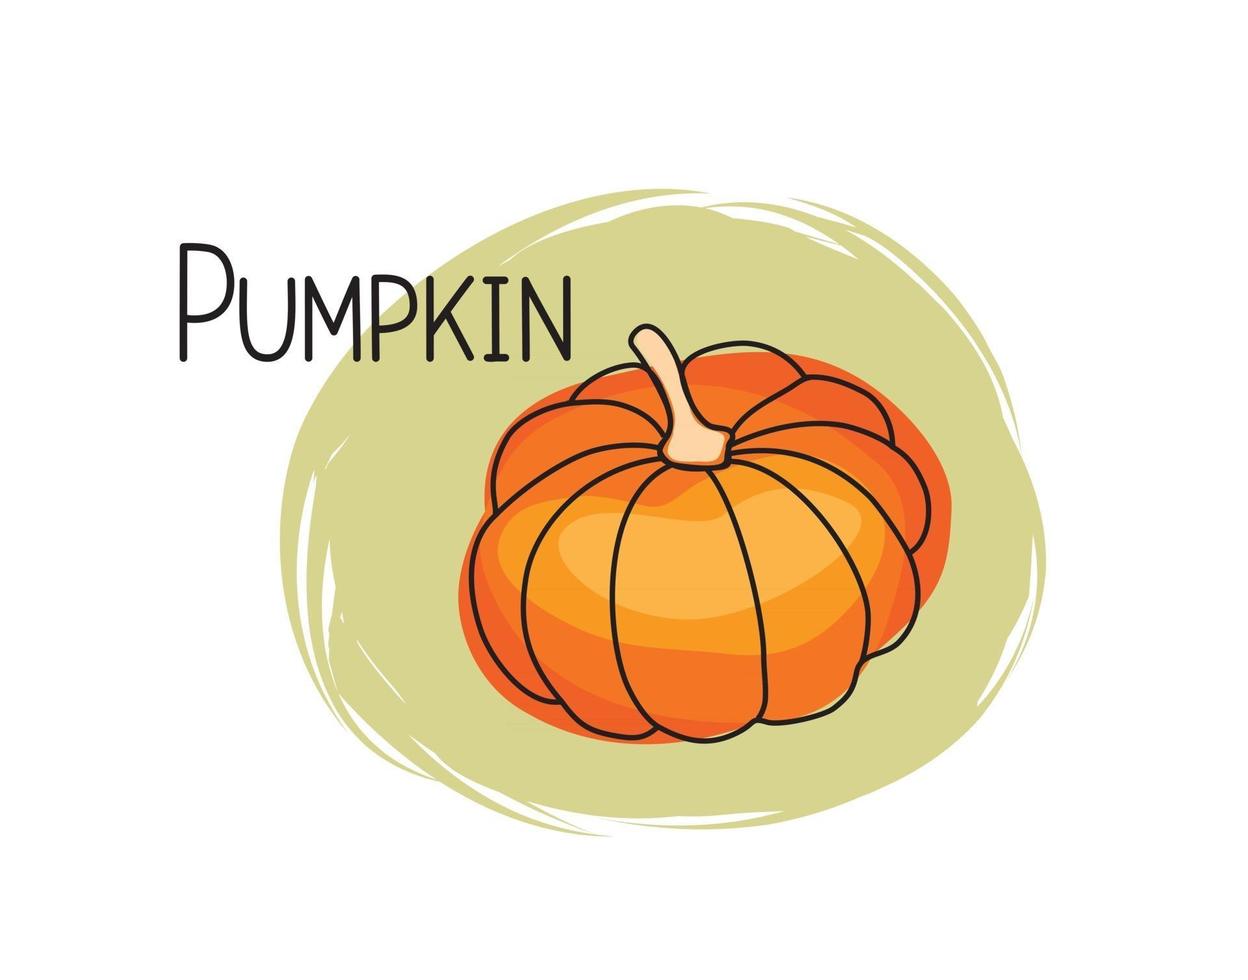 Pumpkin icon. Full fruit pumpkin isolated on white background with lettering Pumpkin. Vegetable stylish drawn symbol Pumpkin vector